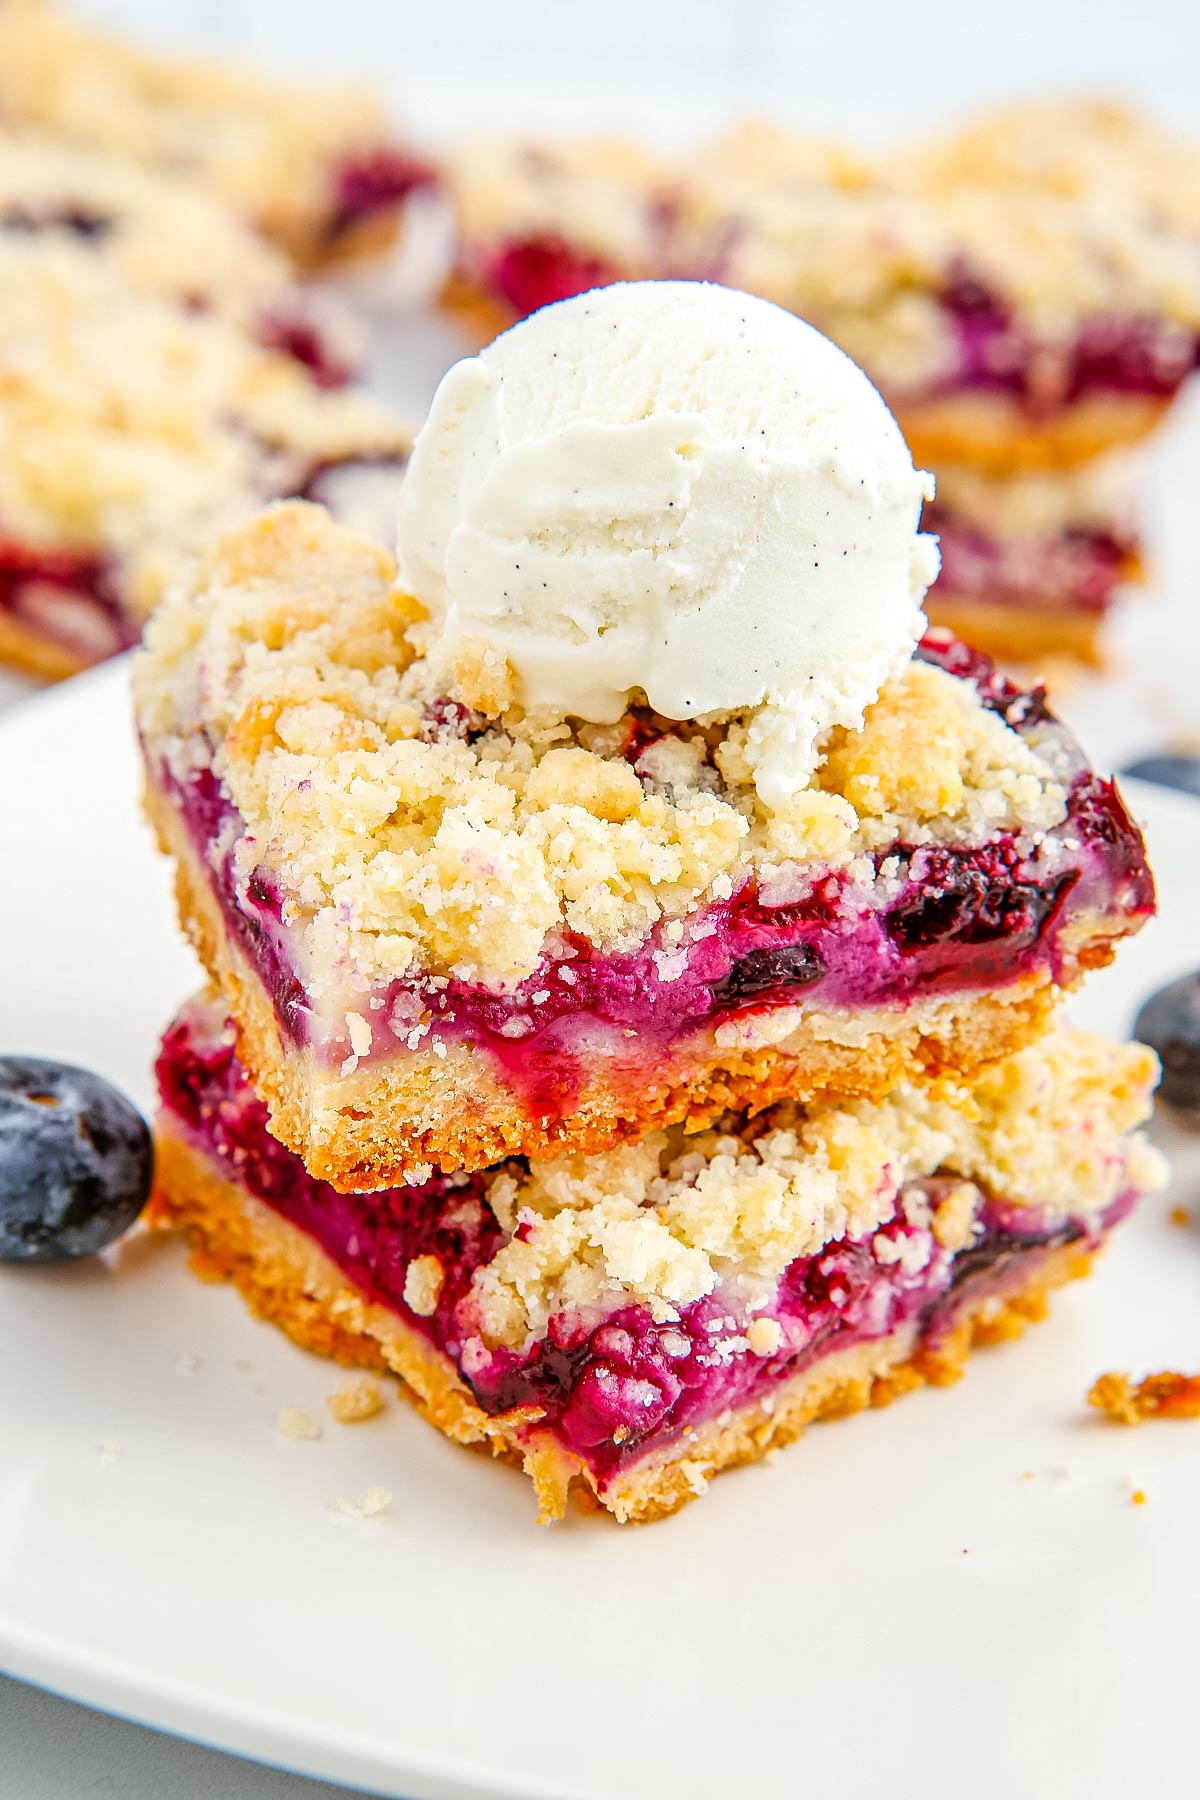 Two Blueberry Crumb Bars with a scoop of ice cream on top.